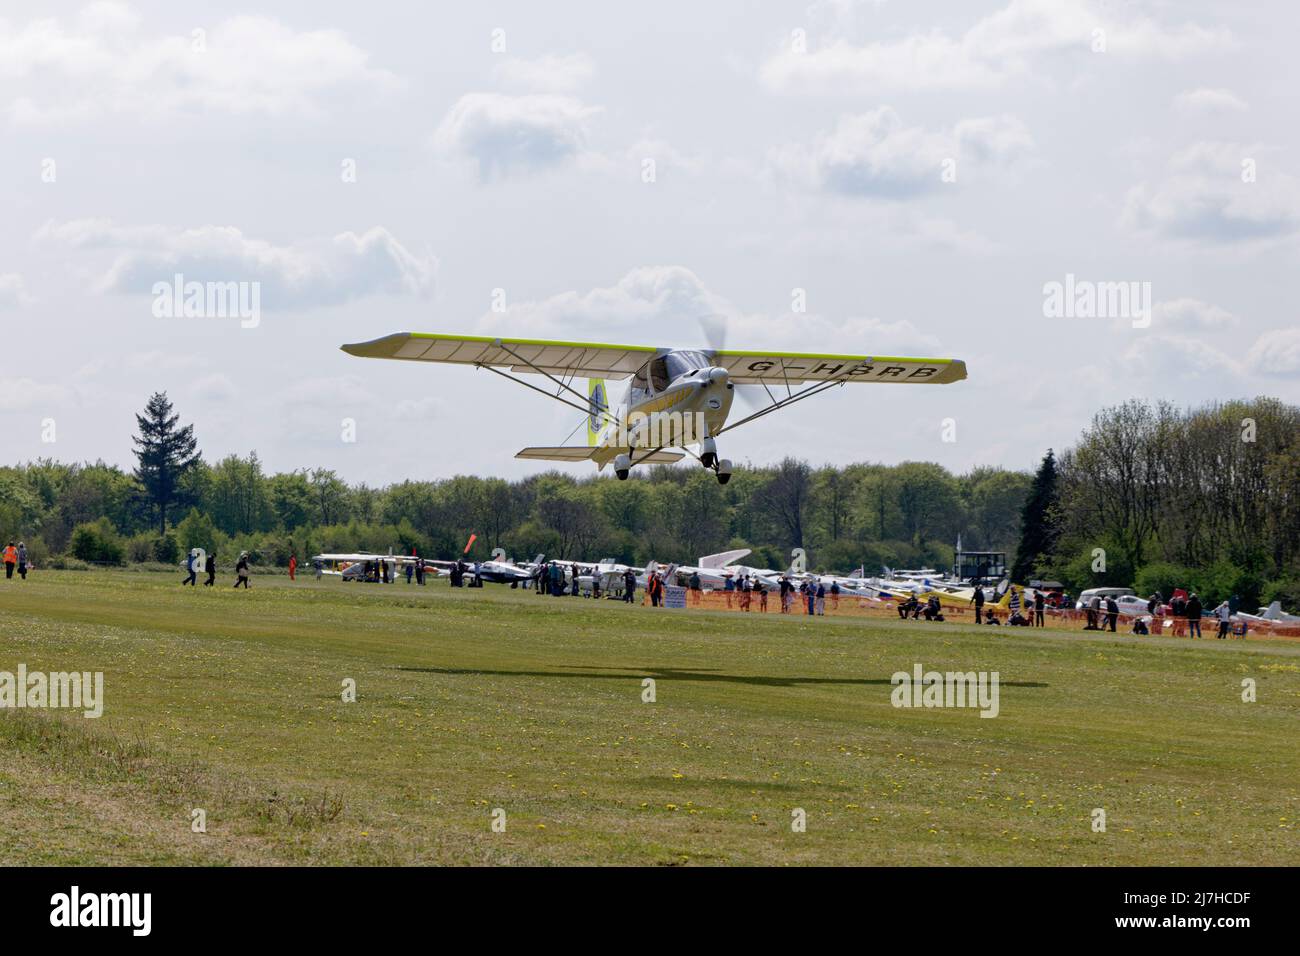 Ikarus C42 Microlight airplane G-HBRB of the Air Adventures Flying Club takes off from the grass runway at Popham Airfield near Basingstoke Stock Photo